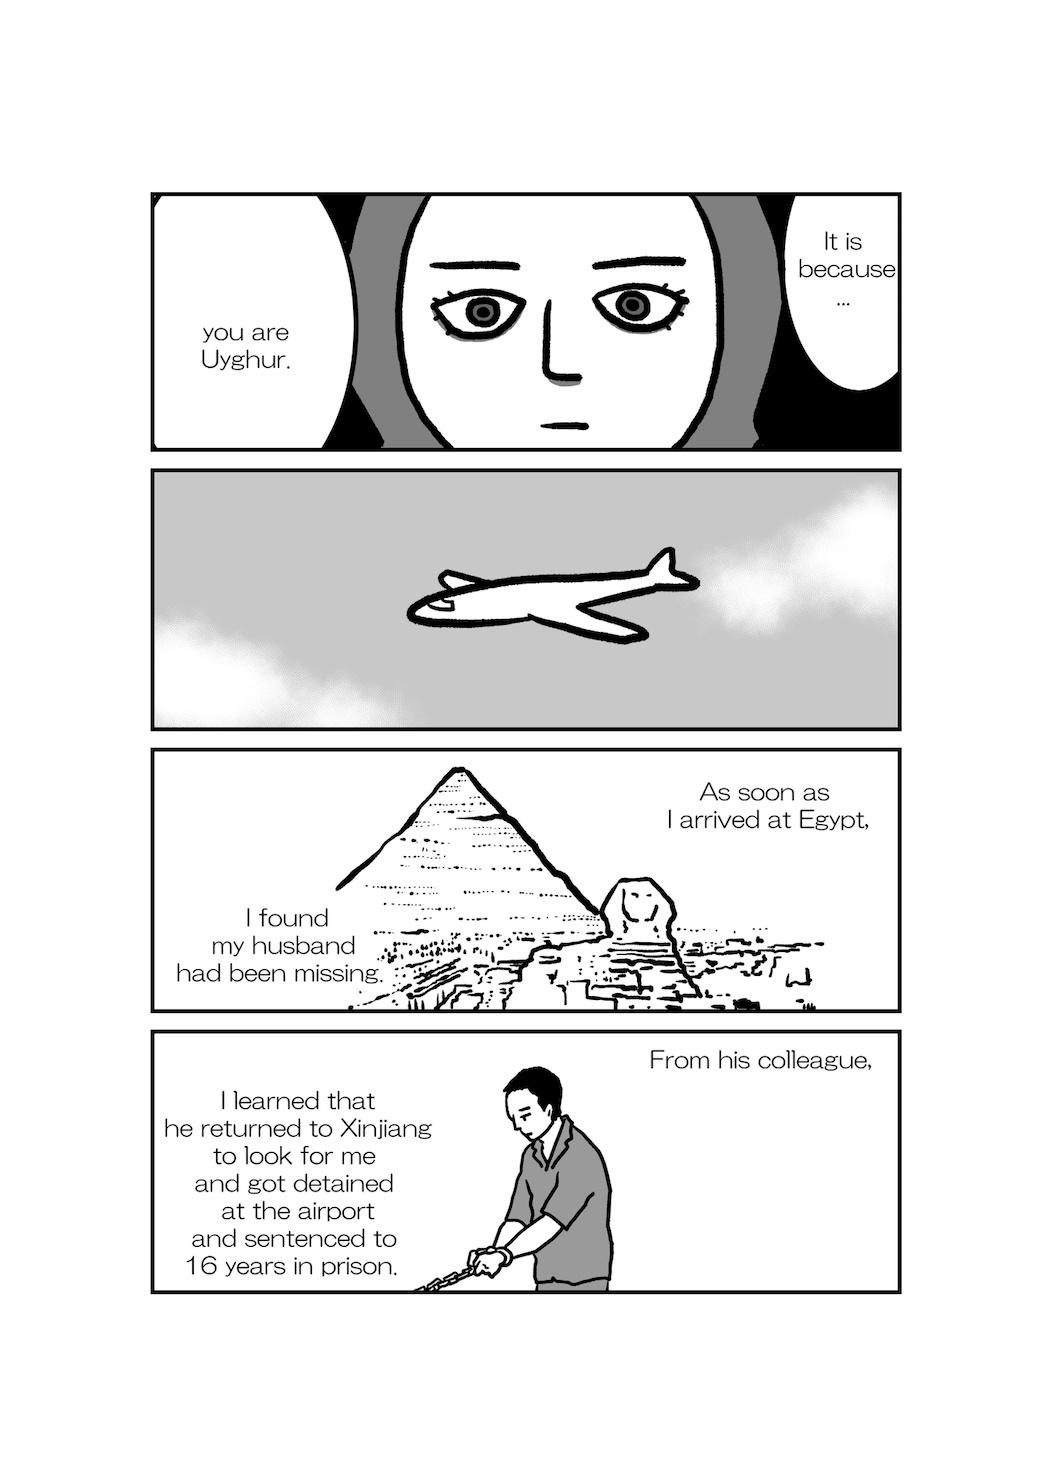 A page of the comic titled "What has happened to me– A testimony of a Uyghur woman," drawn by Japanese artist Tomomi Shimizu, is seen in this handout image obtained by Reuters on Dec. 17, 2019. (TOMOMI SHIMIZU@SWIM_SHU/Handout via Reuters)